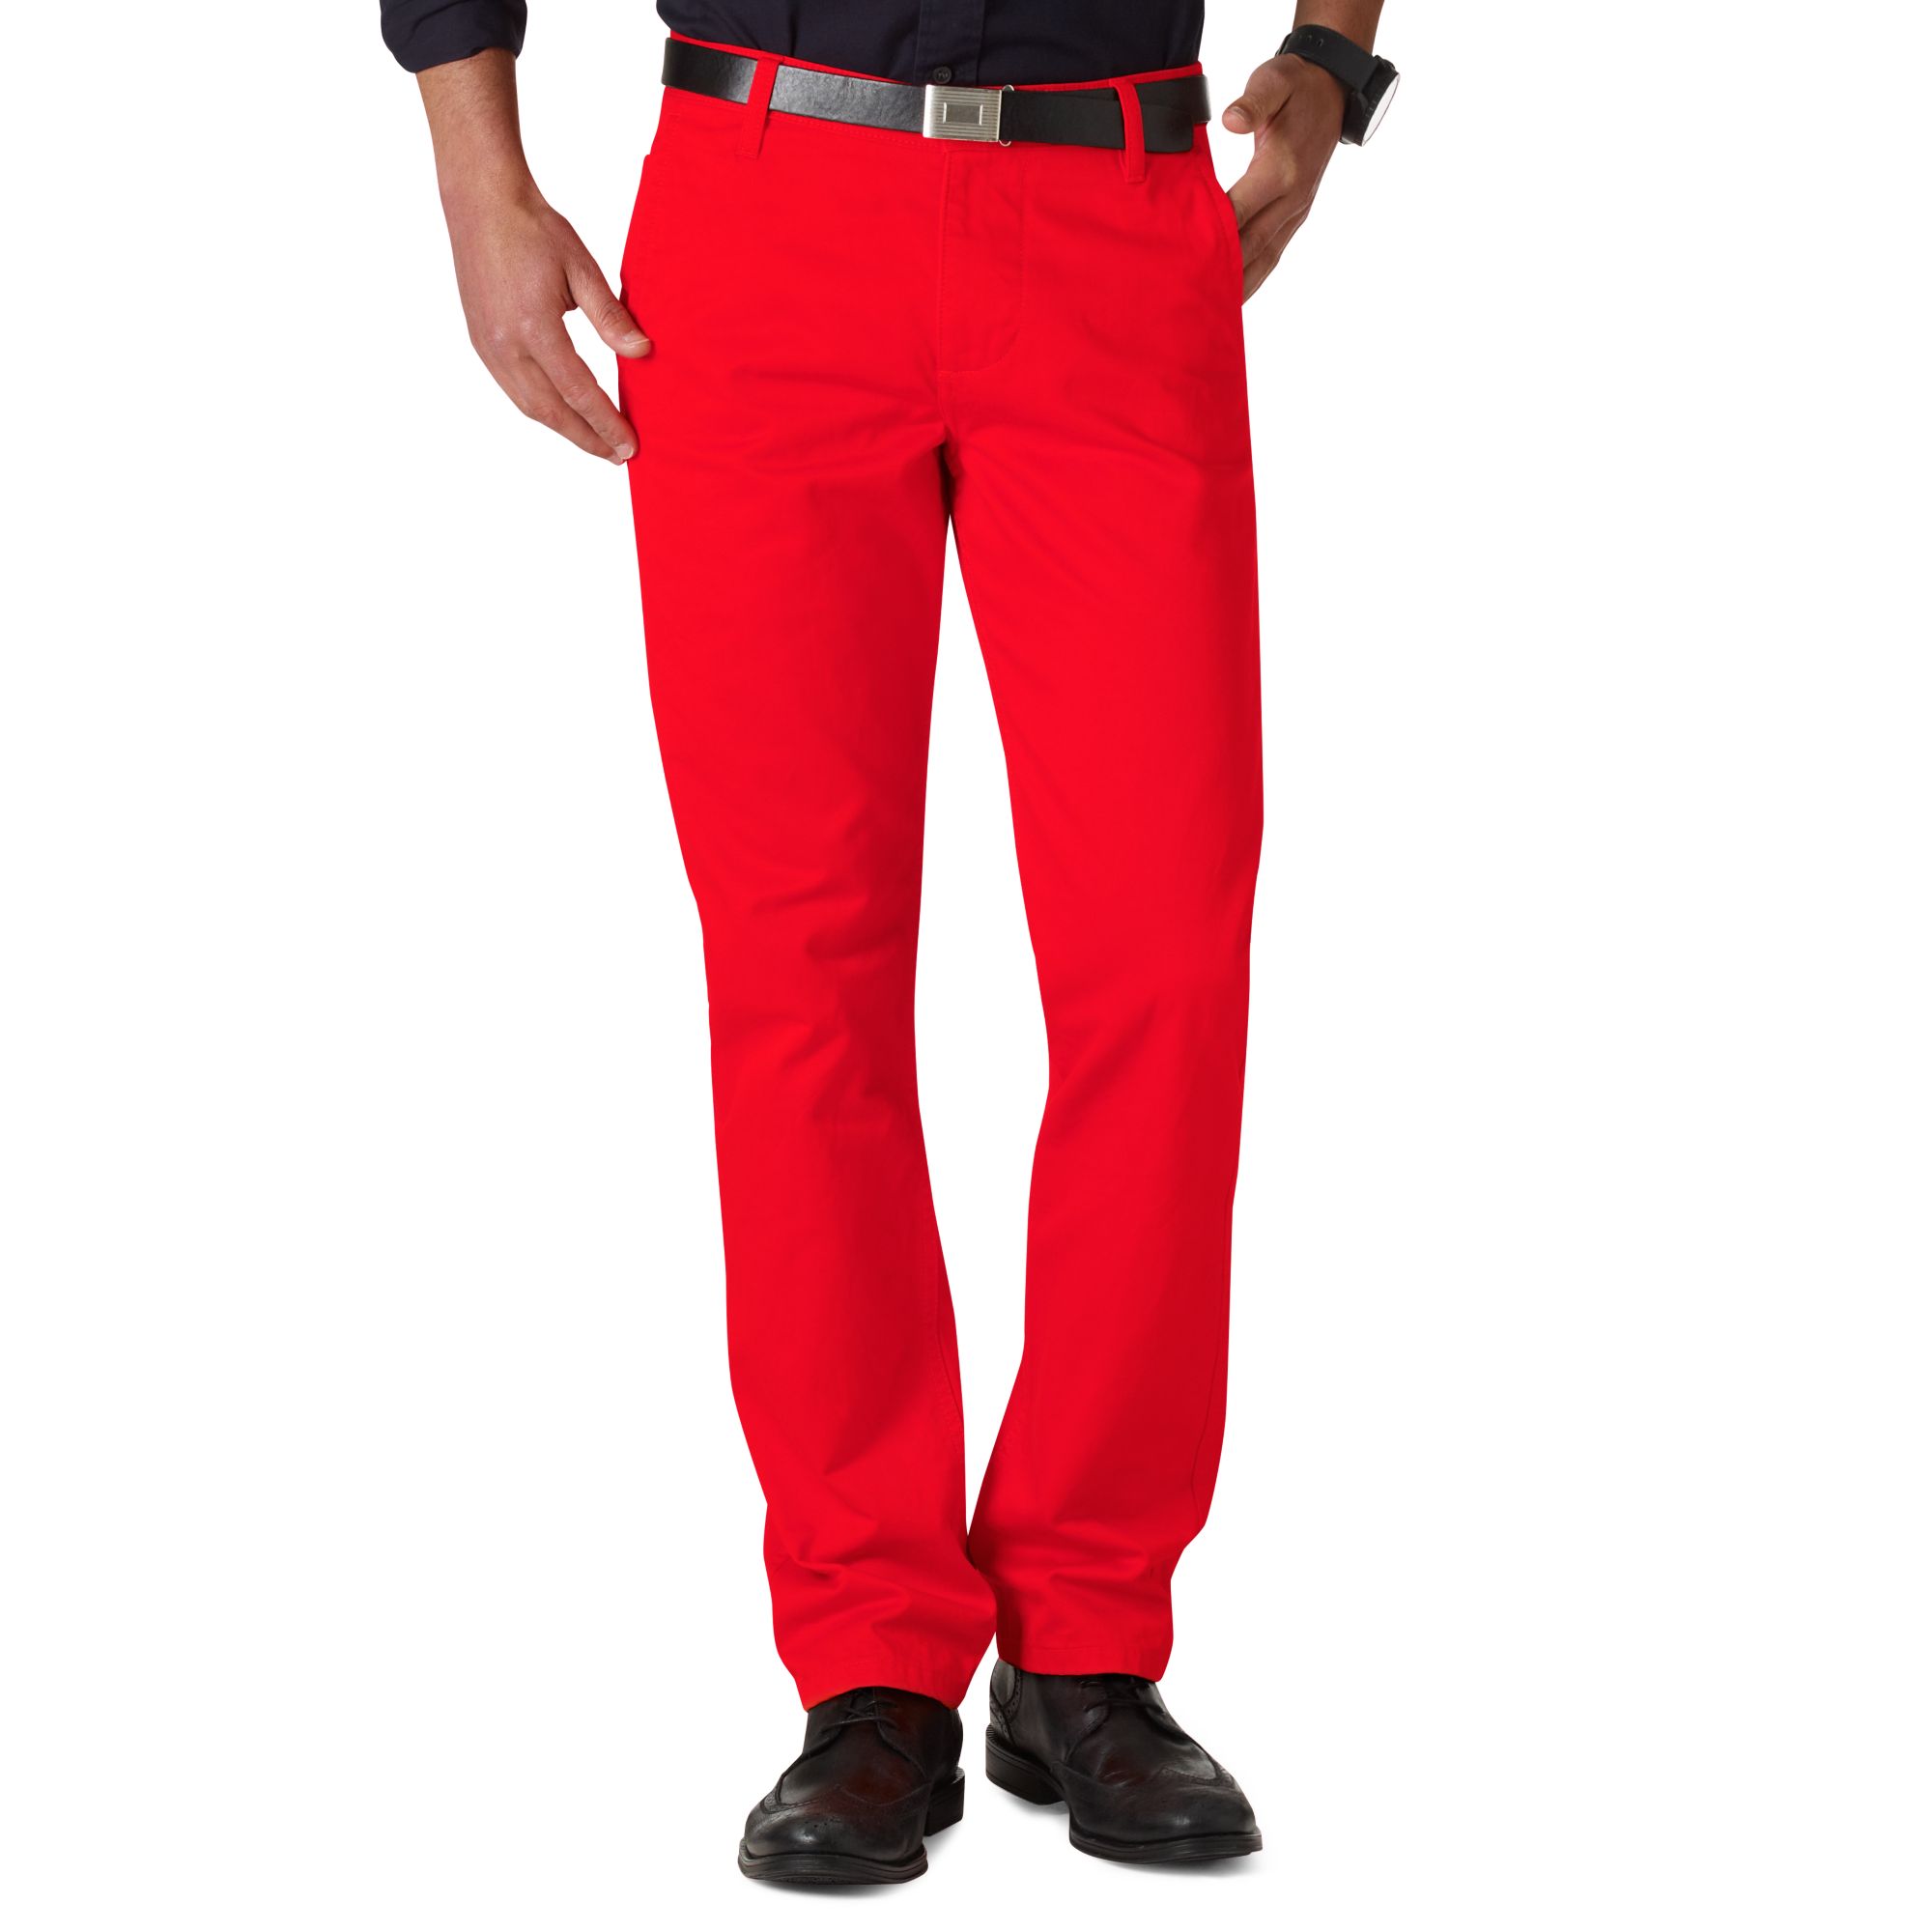 Dockers Slimfit Game Day Alpha Khaki Georgia Pants in Red for Men - Lyst